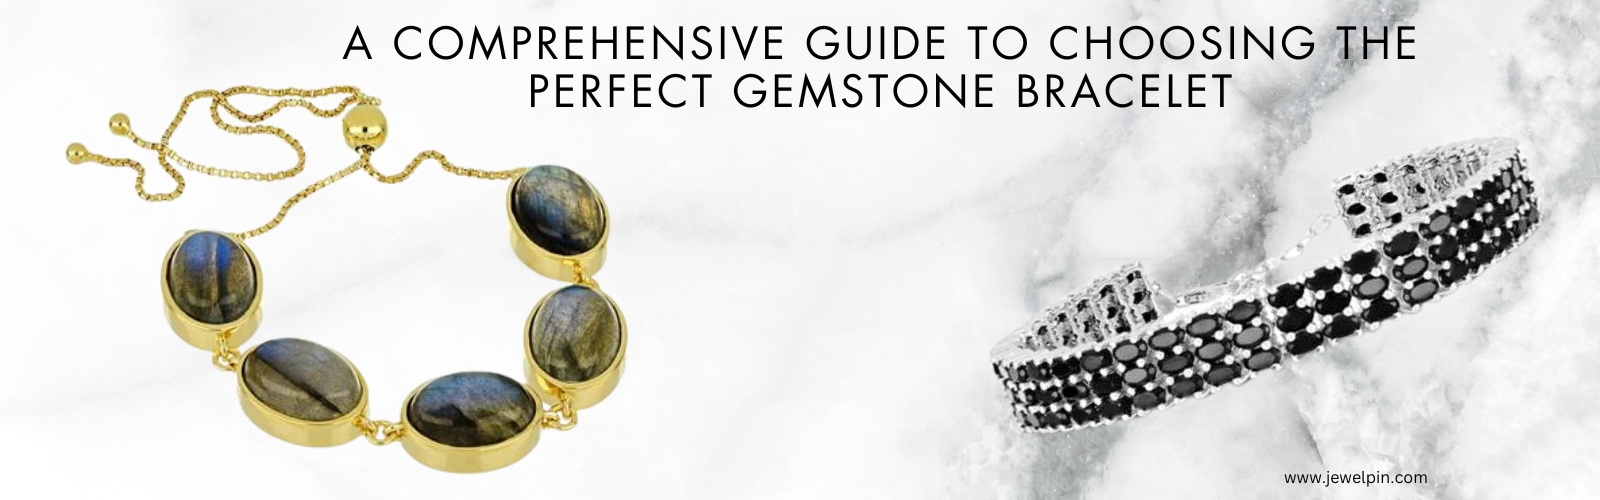 Jewelpin -  Guide to Choosing the Perfect Sterling Silver Gemstone Bracelet - Jewelpin